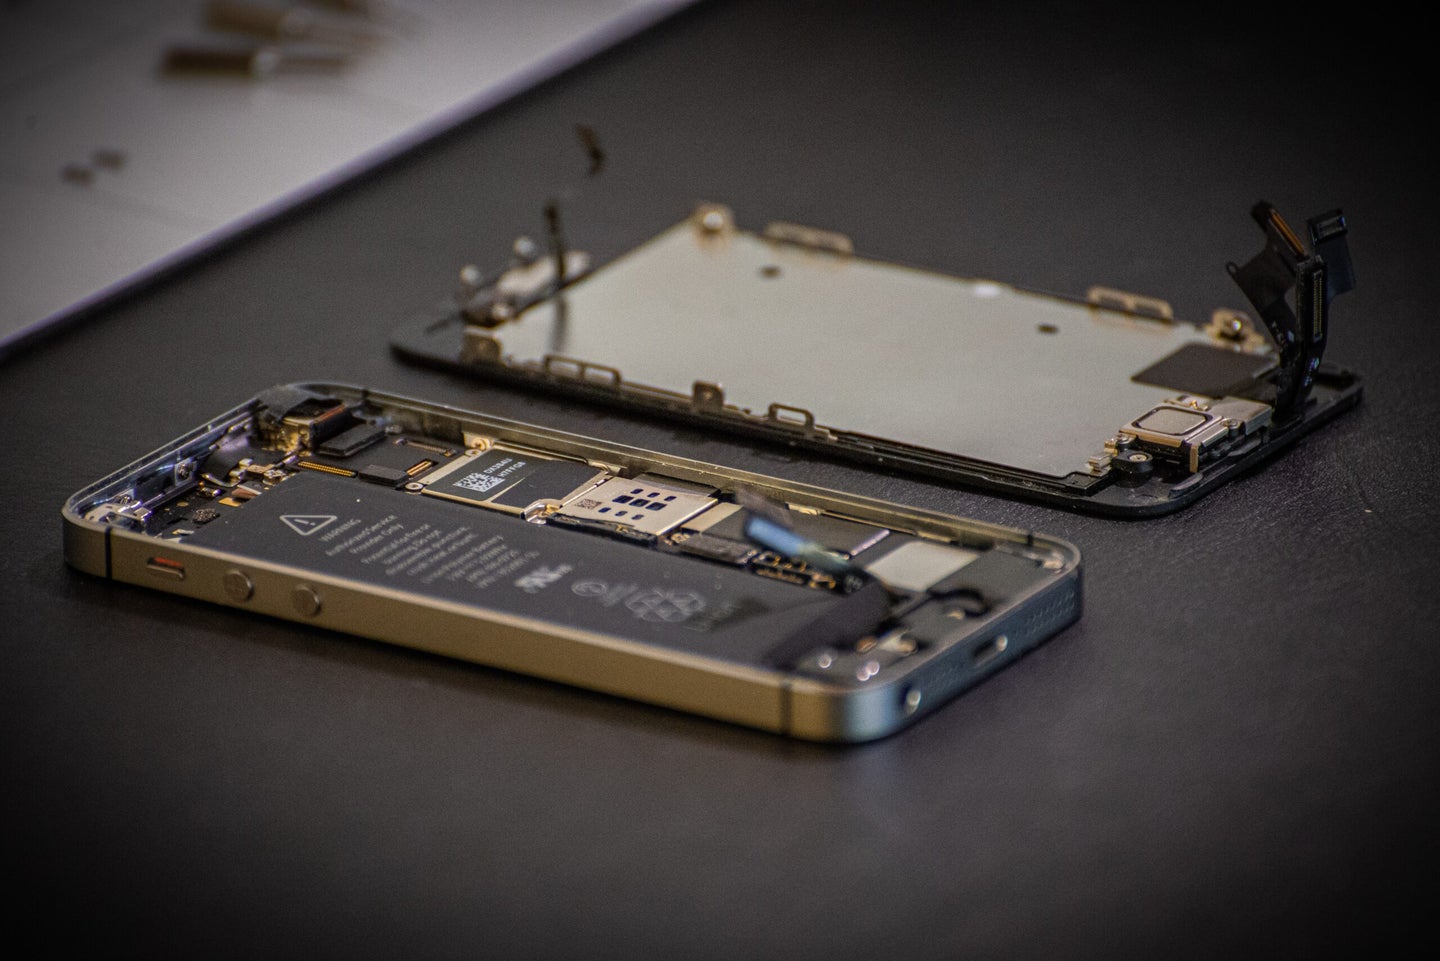 Reasons Why Your iPhone May Require Repair